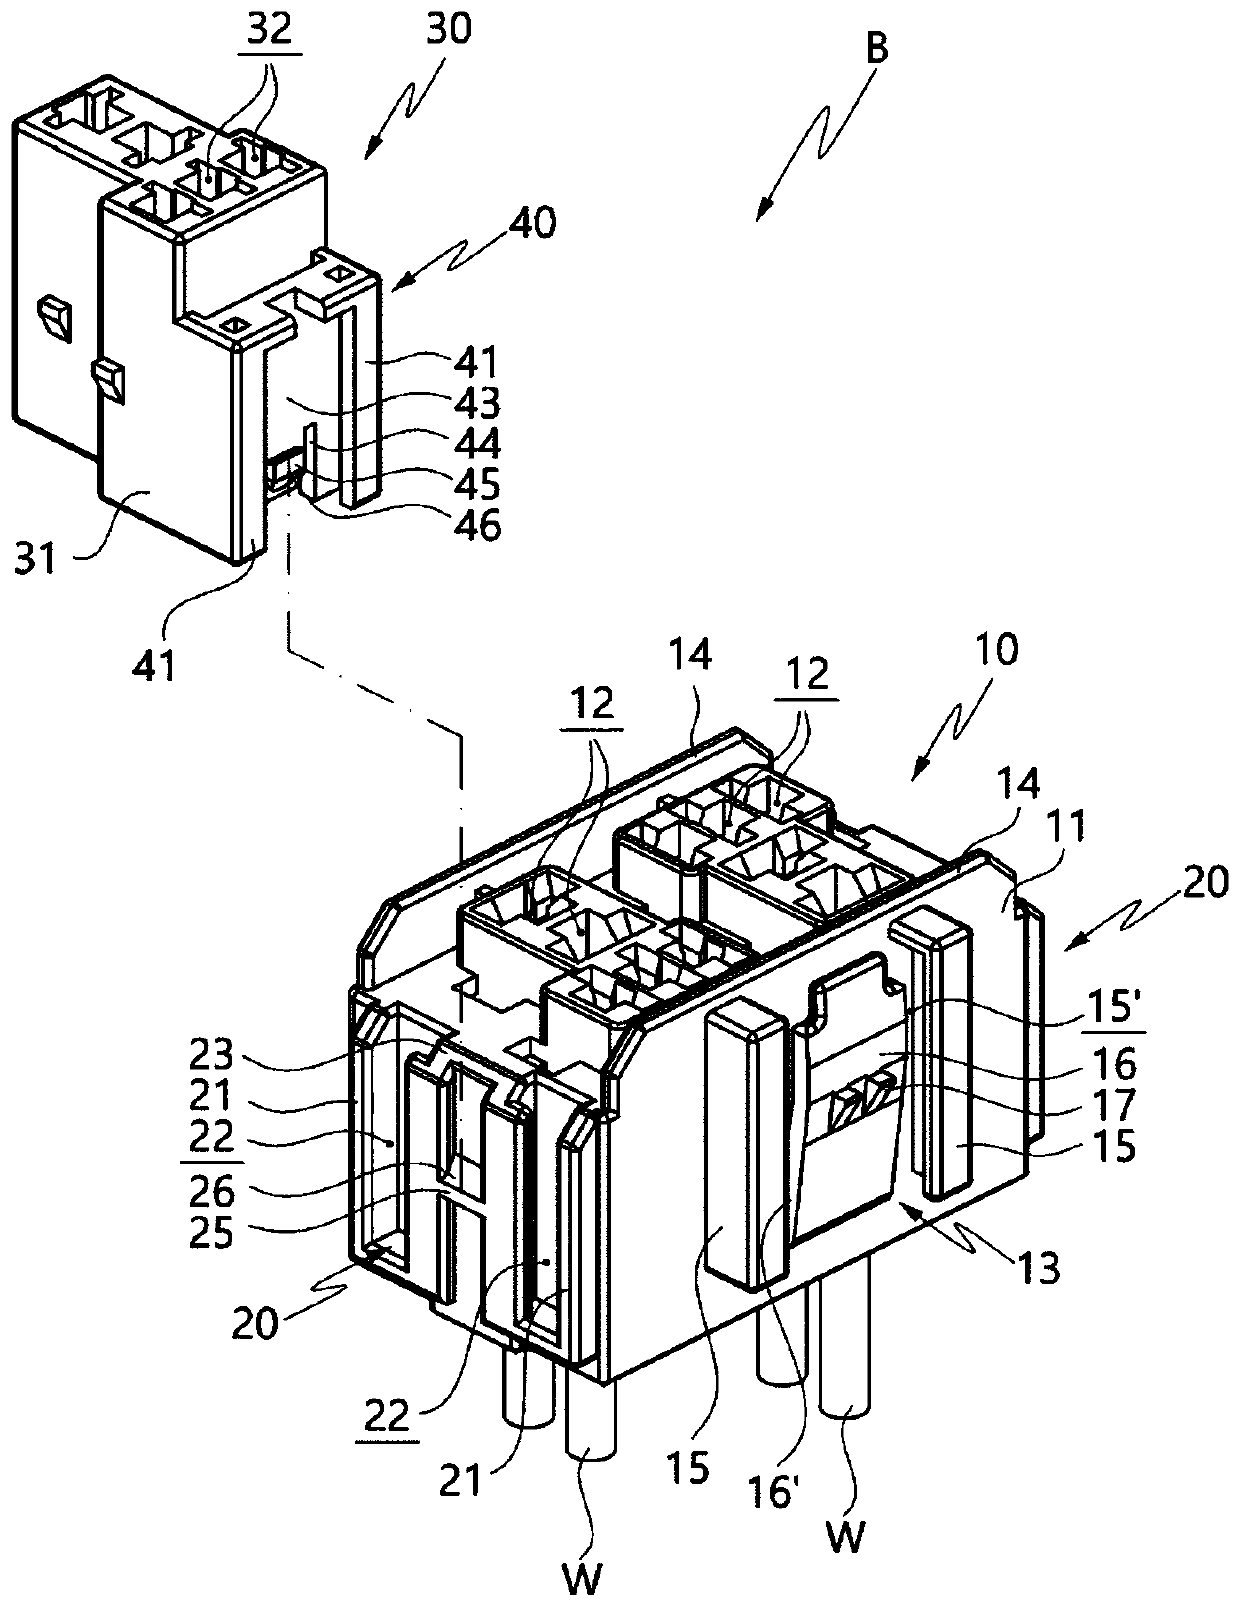 Extendable multi-block and box for car having same